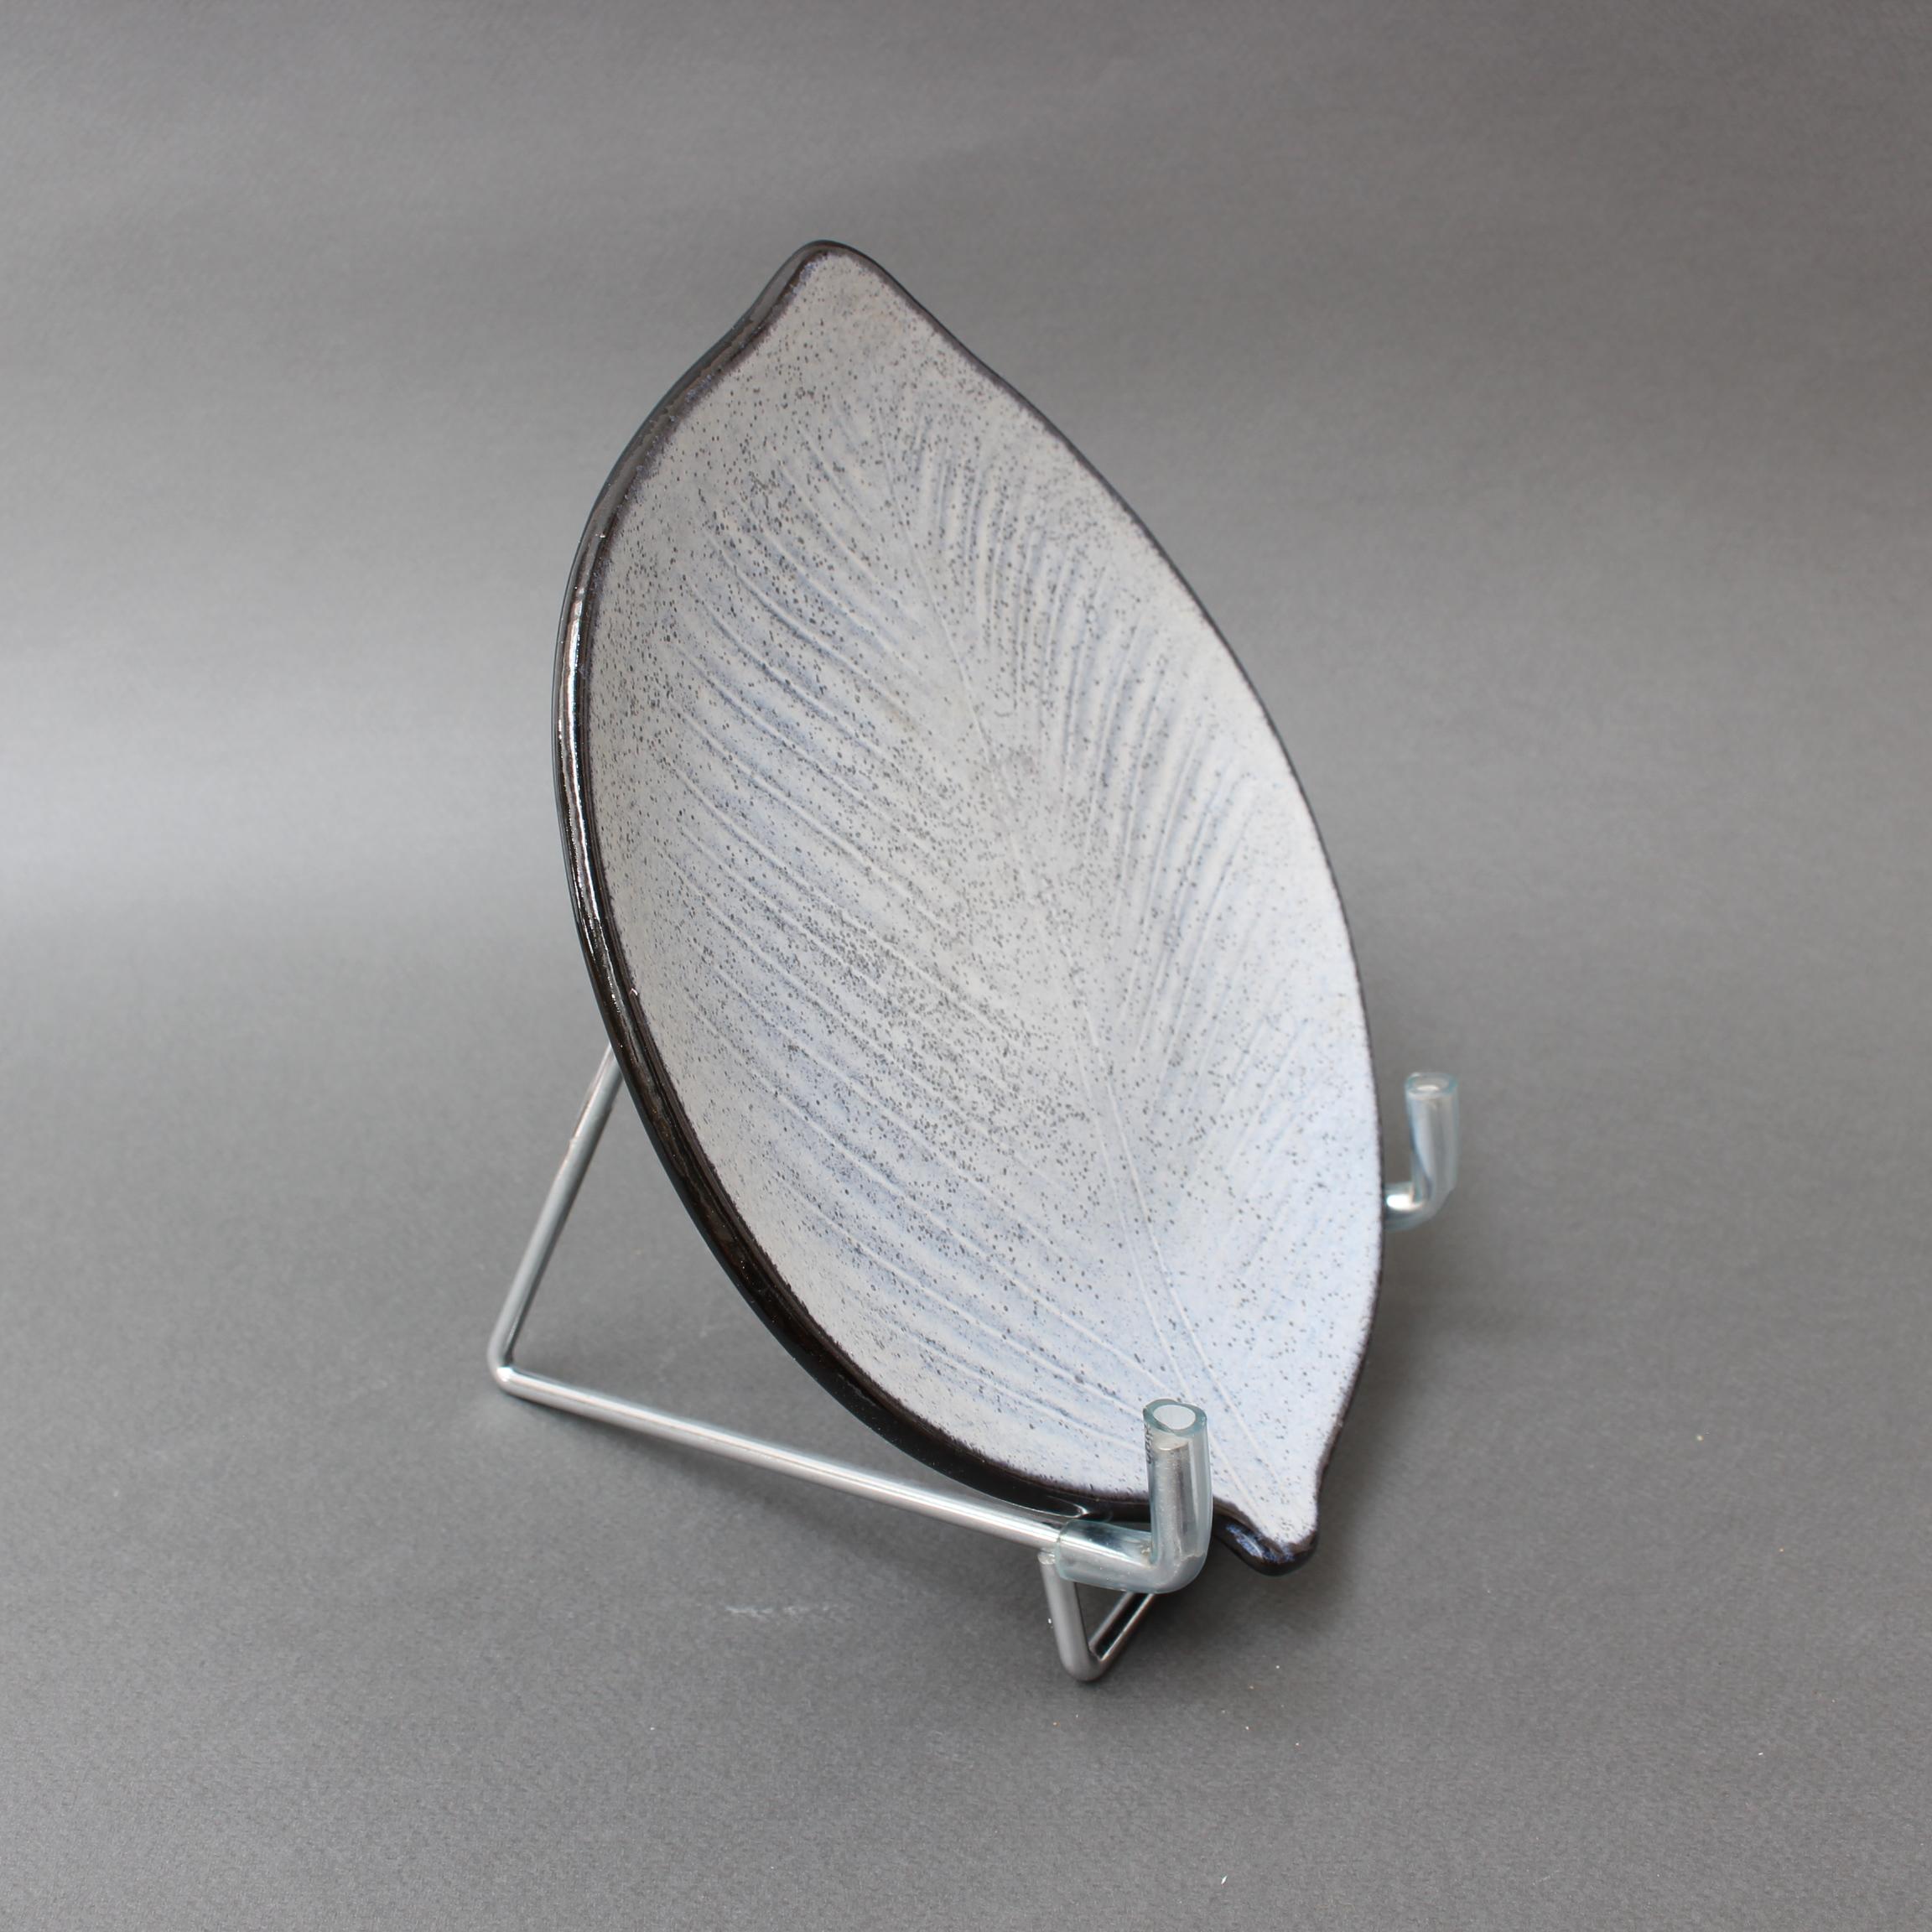 Ceramic Midcentury French Leaf-Shaped Dish / Vide-Poche by Marcel Guillot, circa 1960s